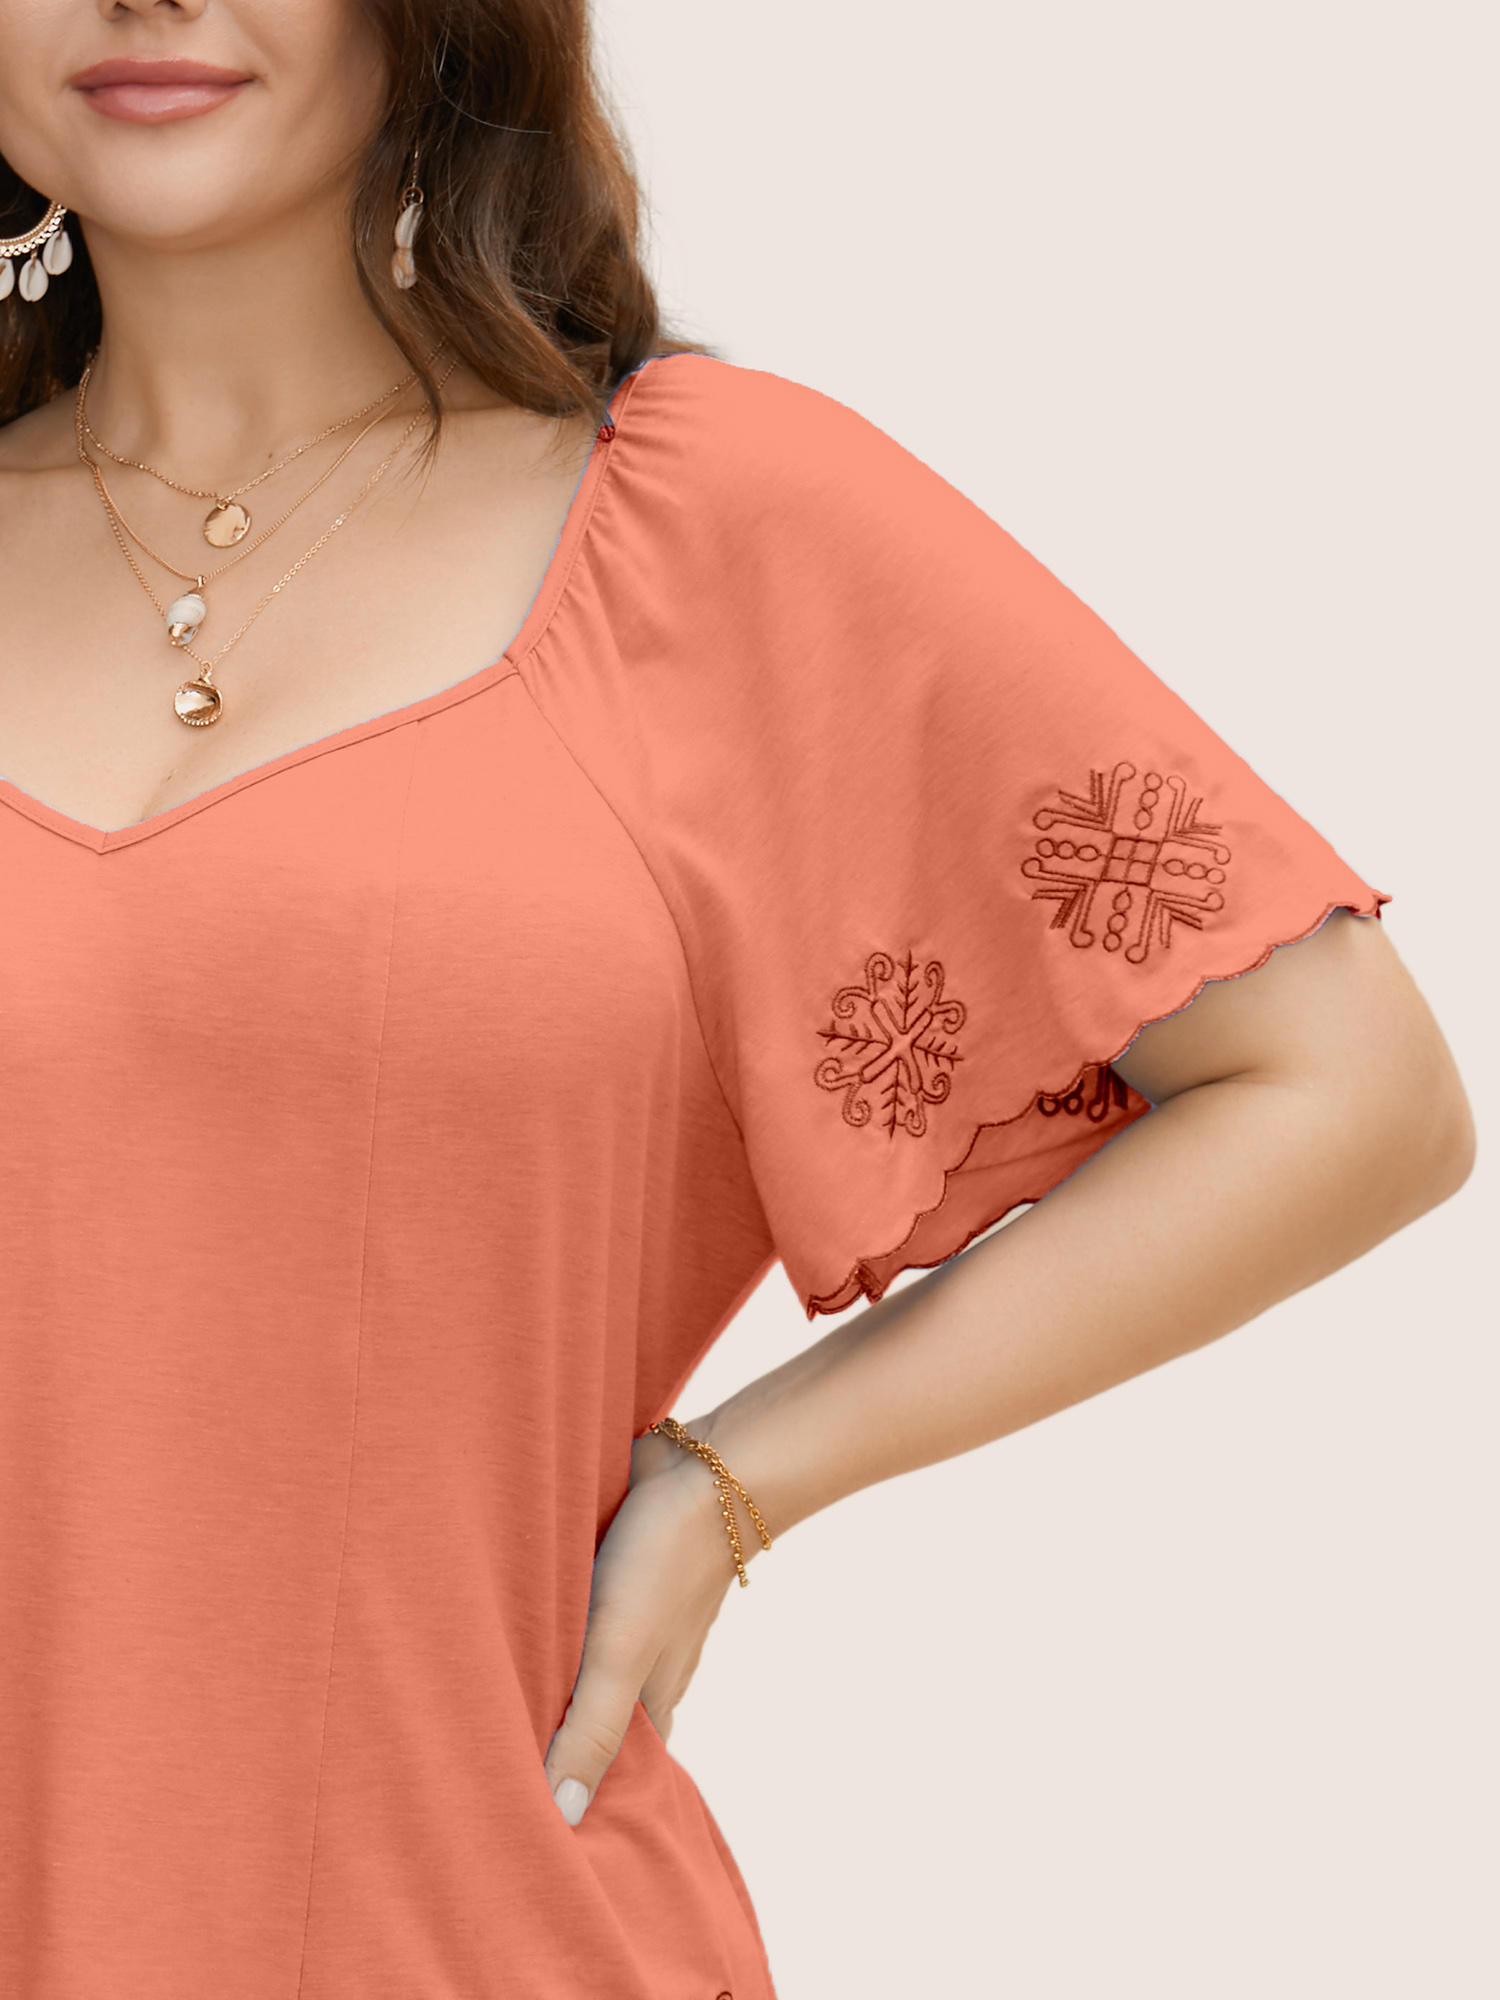 

Plus Size Bandana Floral Embroidered Ruffle Sleeve T-shirt Salmon Women Resort Embroidered Heart neckline Vacation T-shirts BloomChic